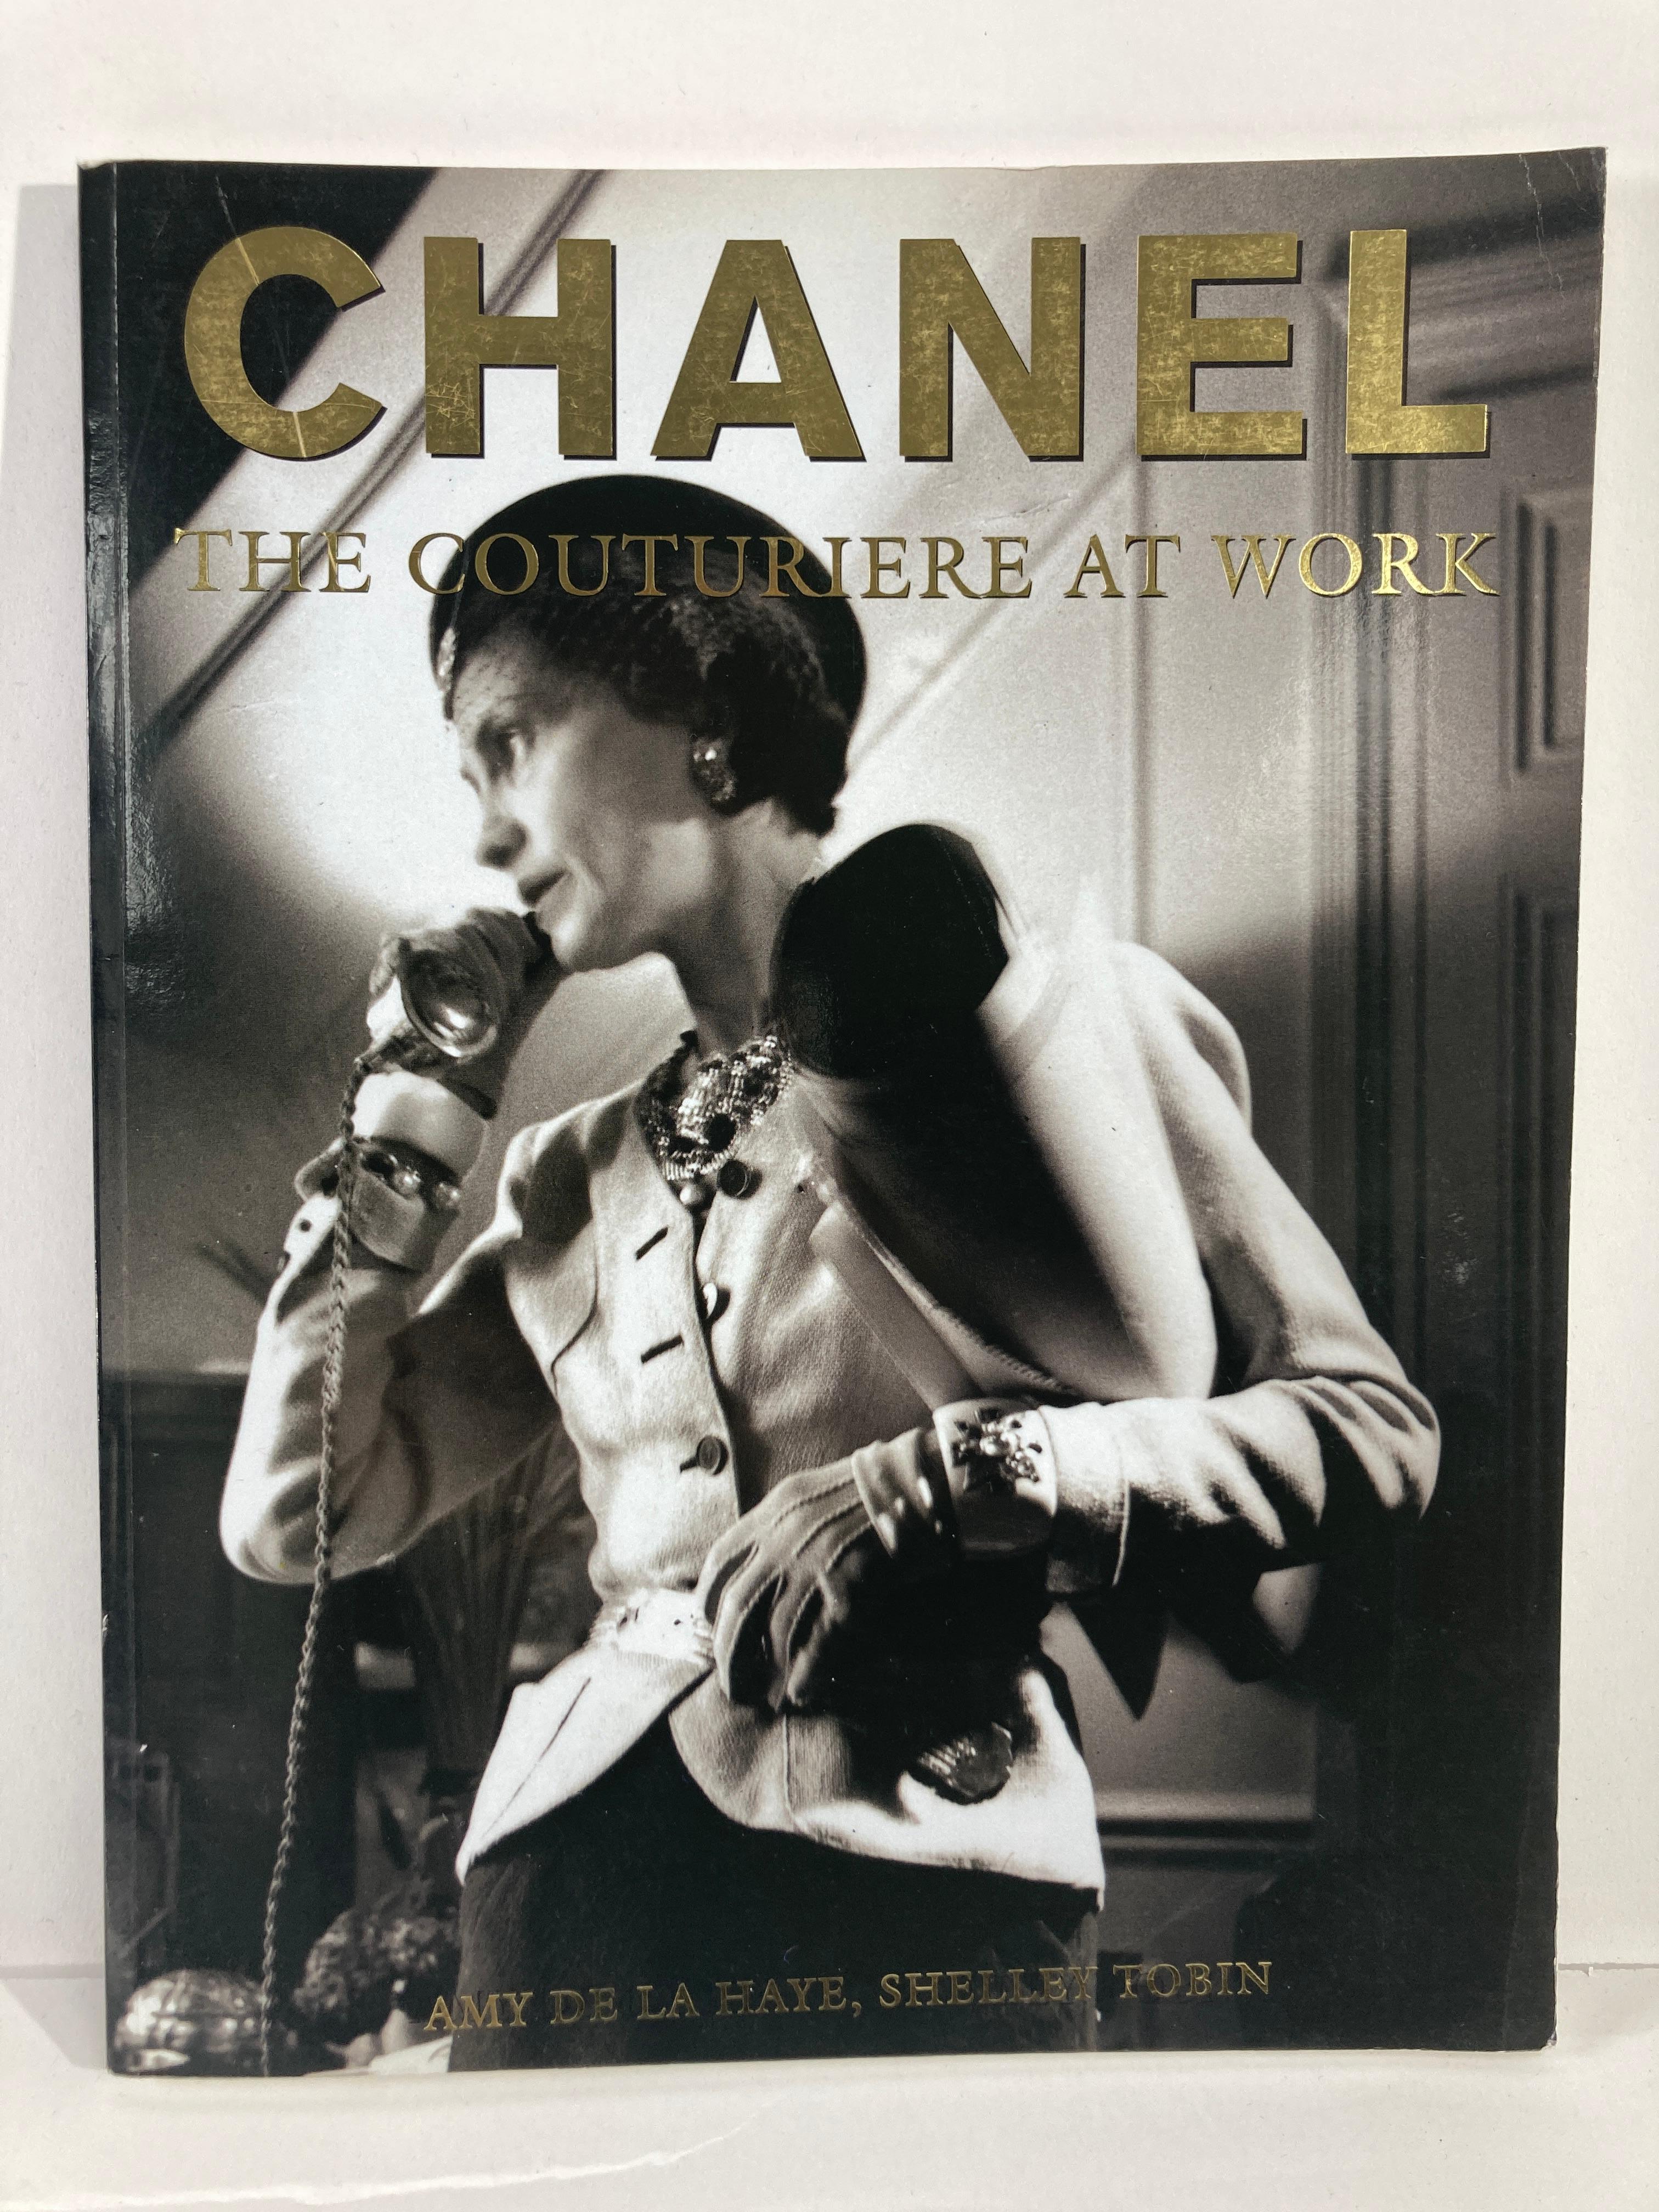 Chanel: The Couturiere at Work Book 1996 1st US Ed. by Amy De la Haye For Sale 1